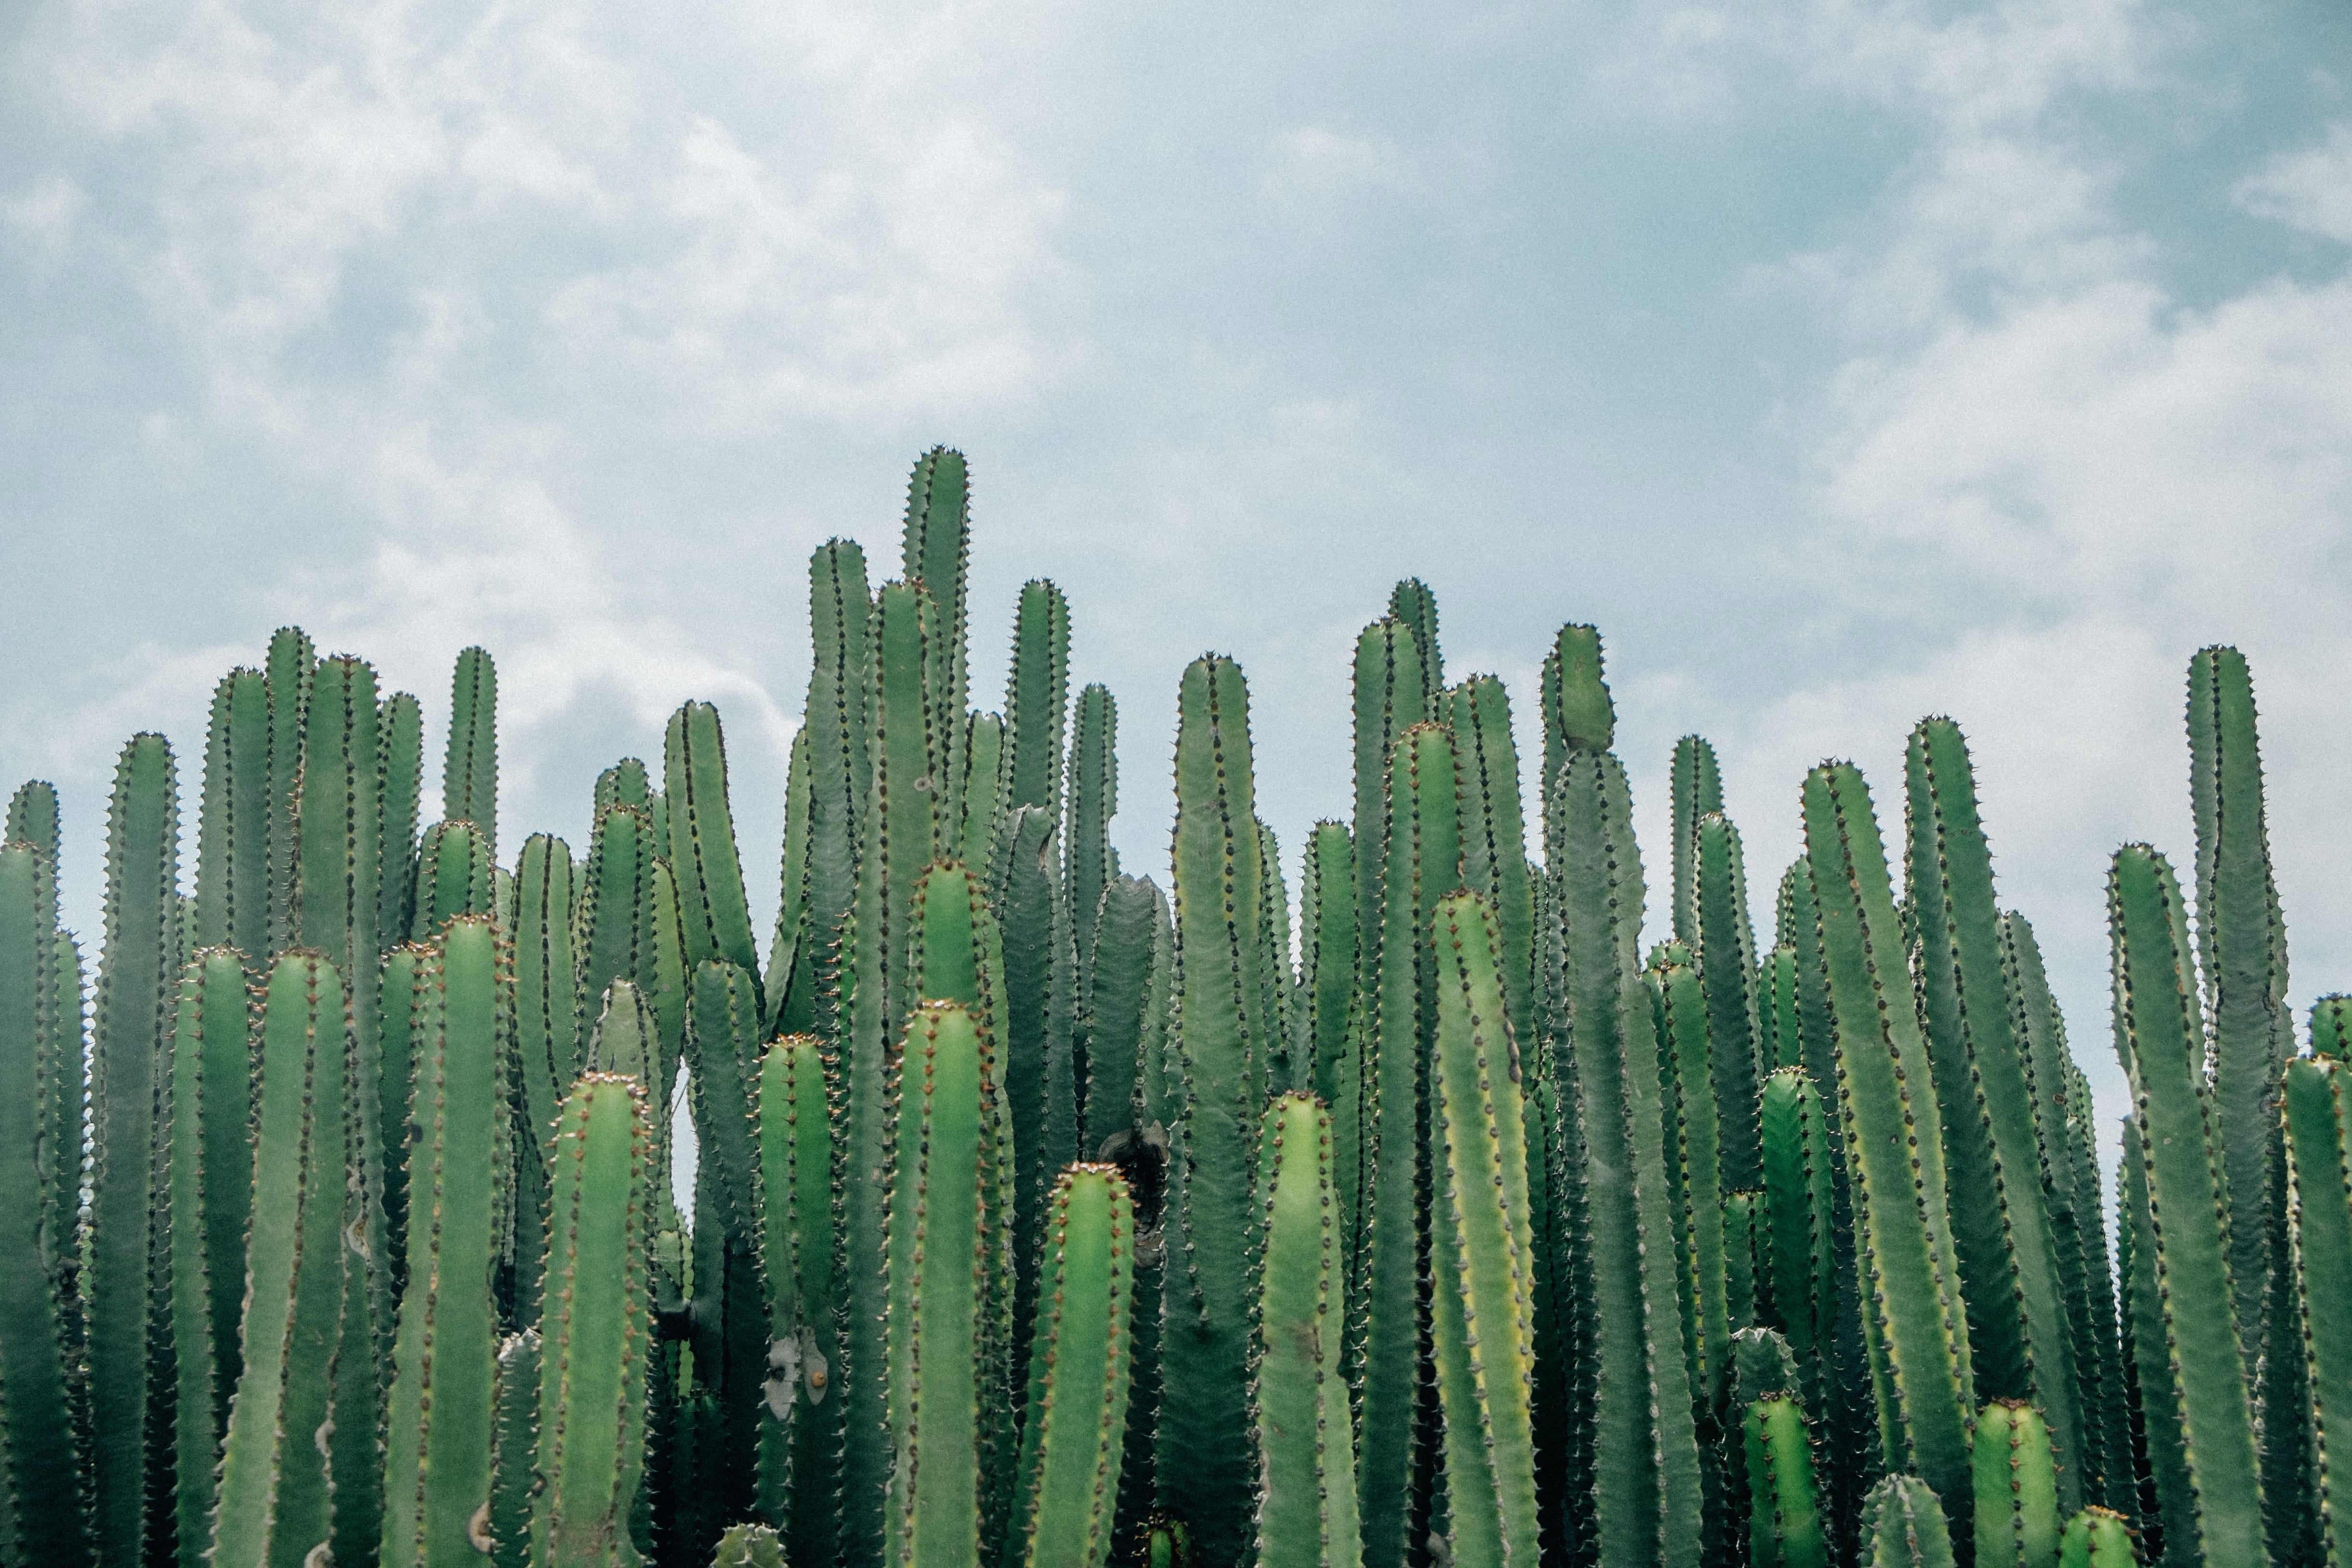 Picture of cactuses